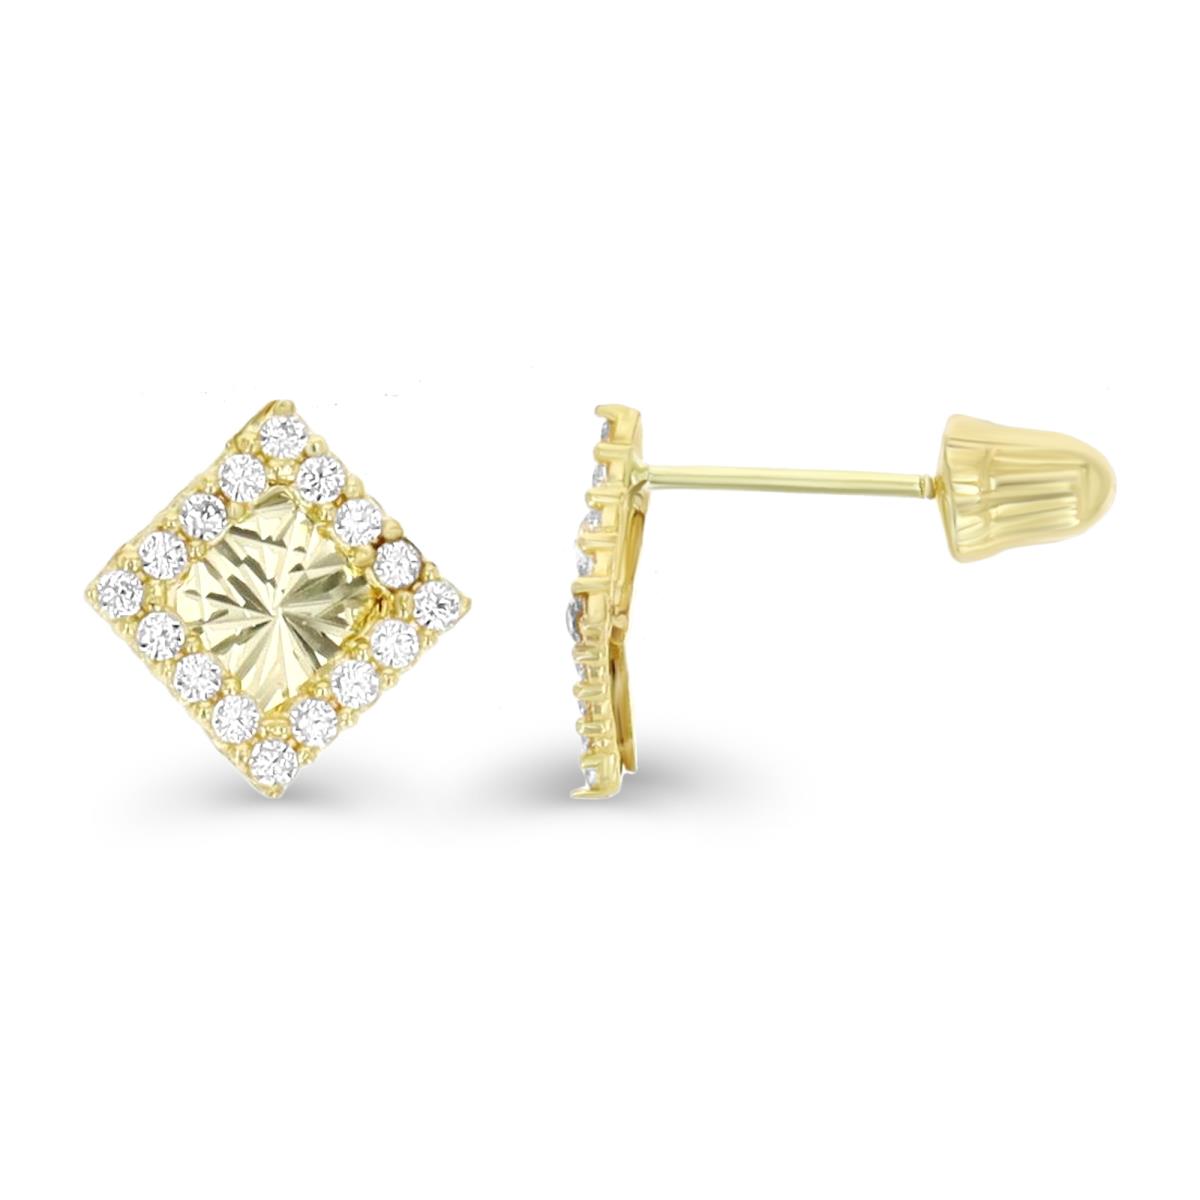 14K Yellow Gold 8x8mm DC Base Square Pave Halo Screw-Back Stud Earring